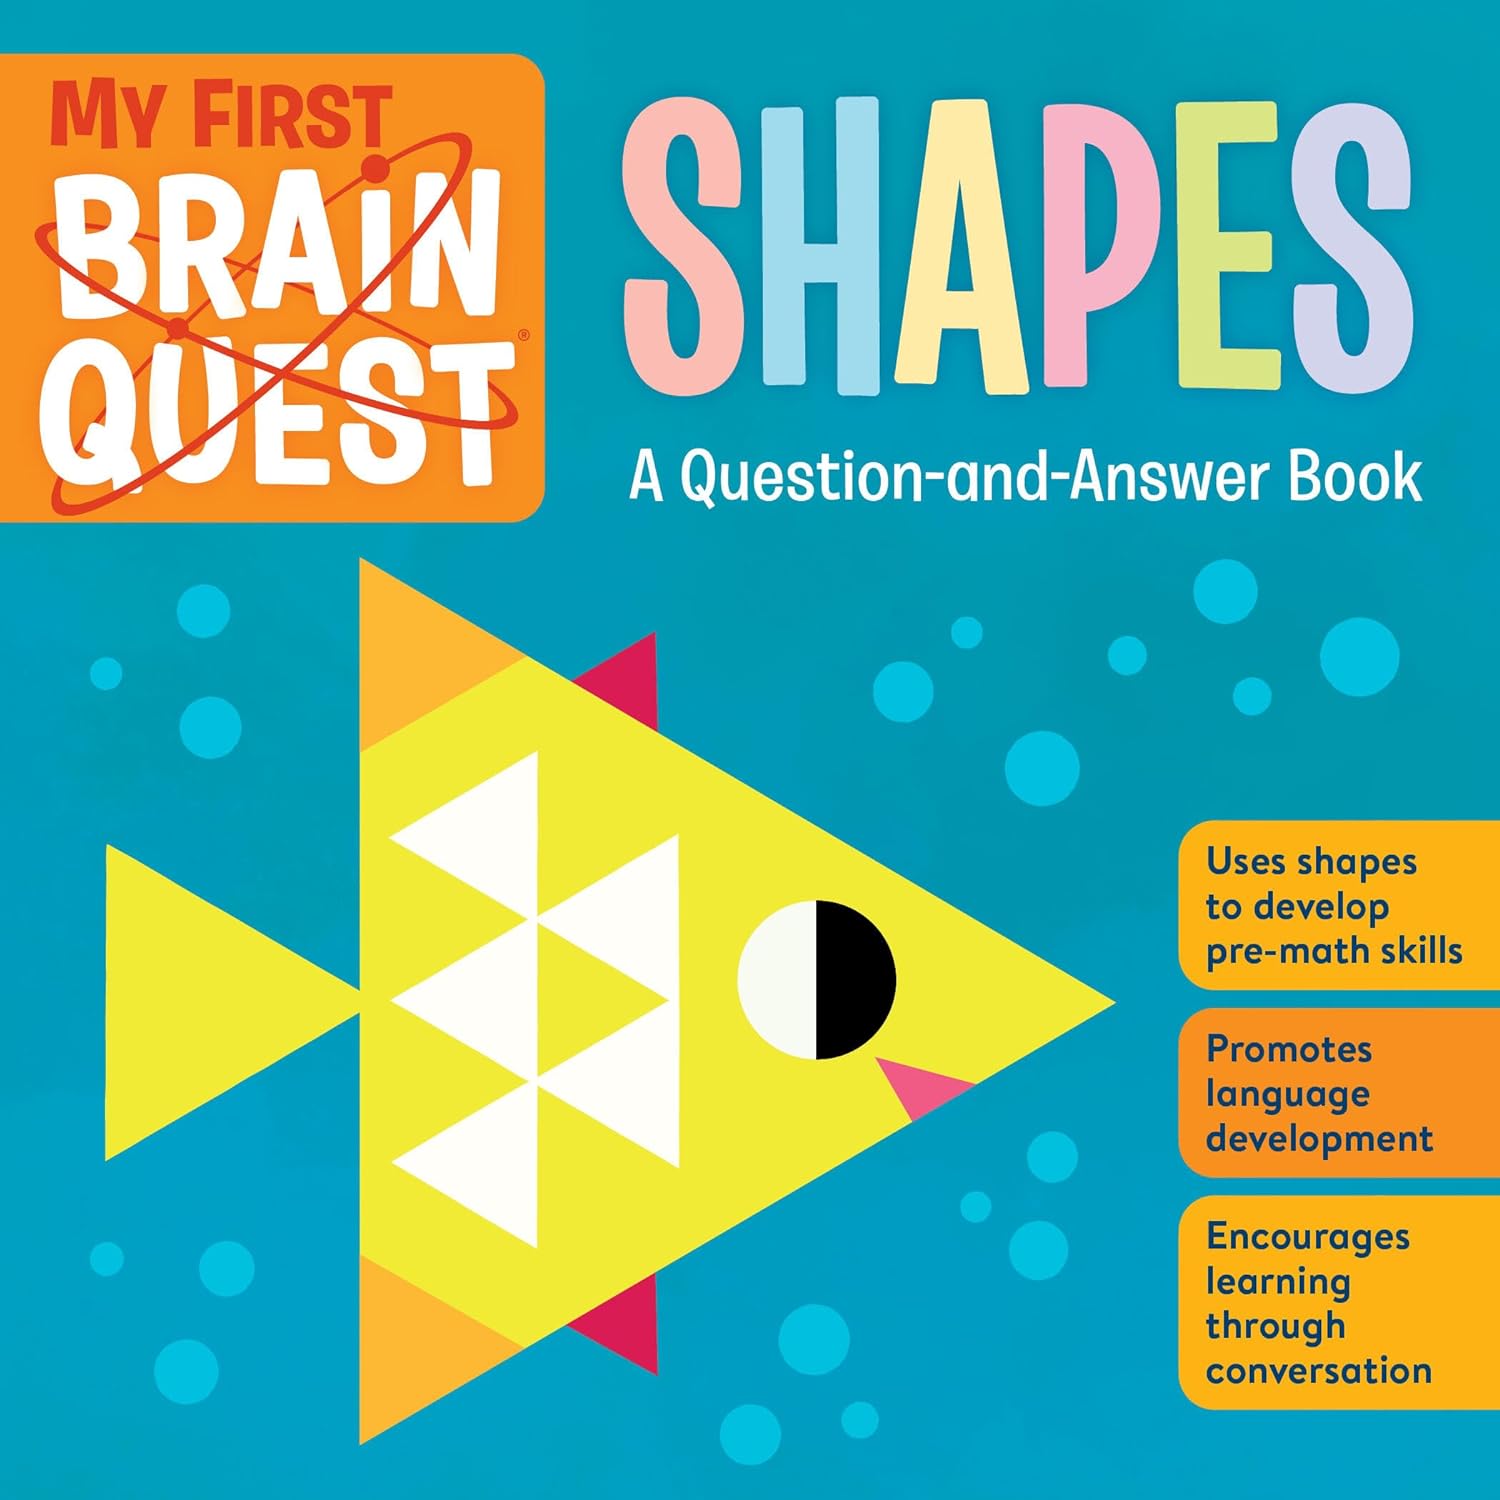 My First Brain Quest Shapes